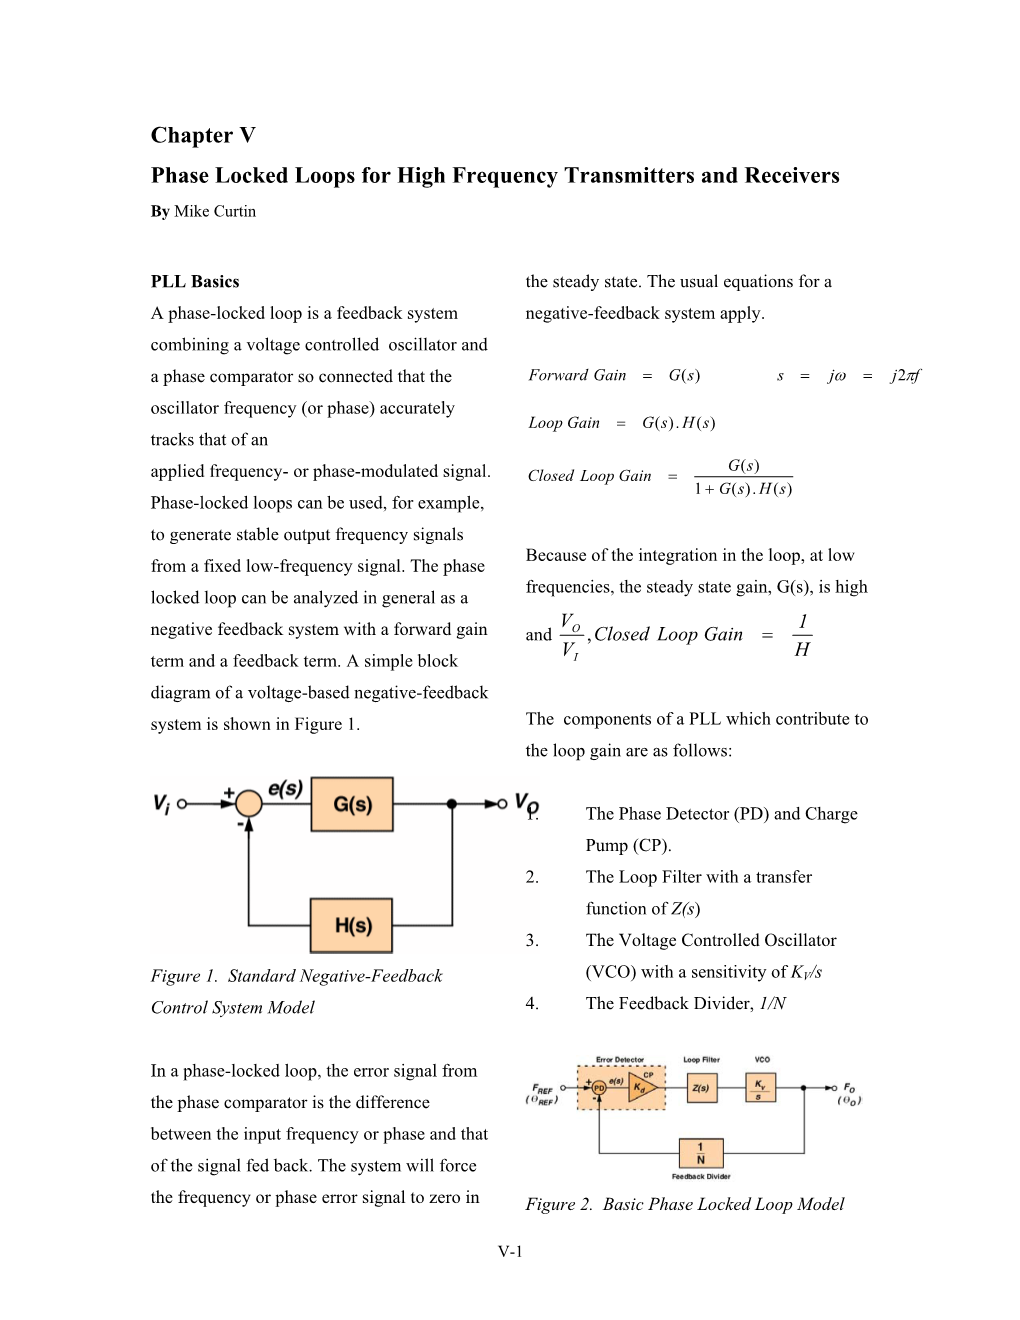 Phase Locked Loop for High Frequency Receivers and Transmitter